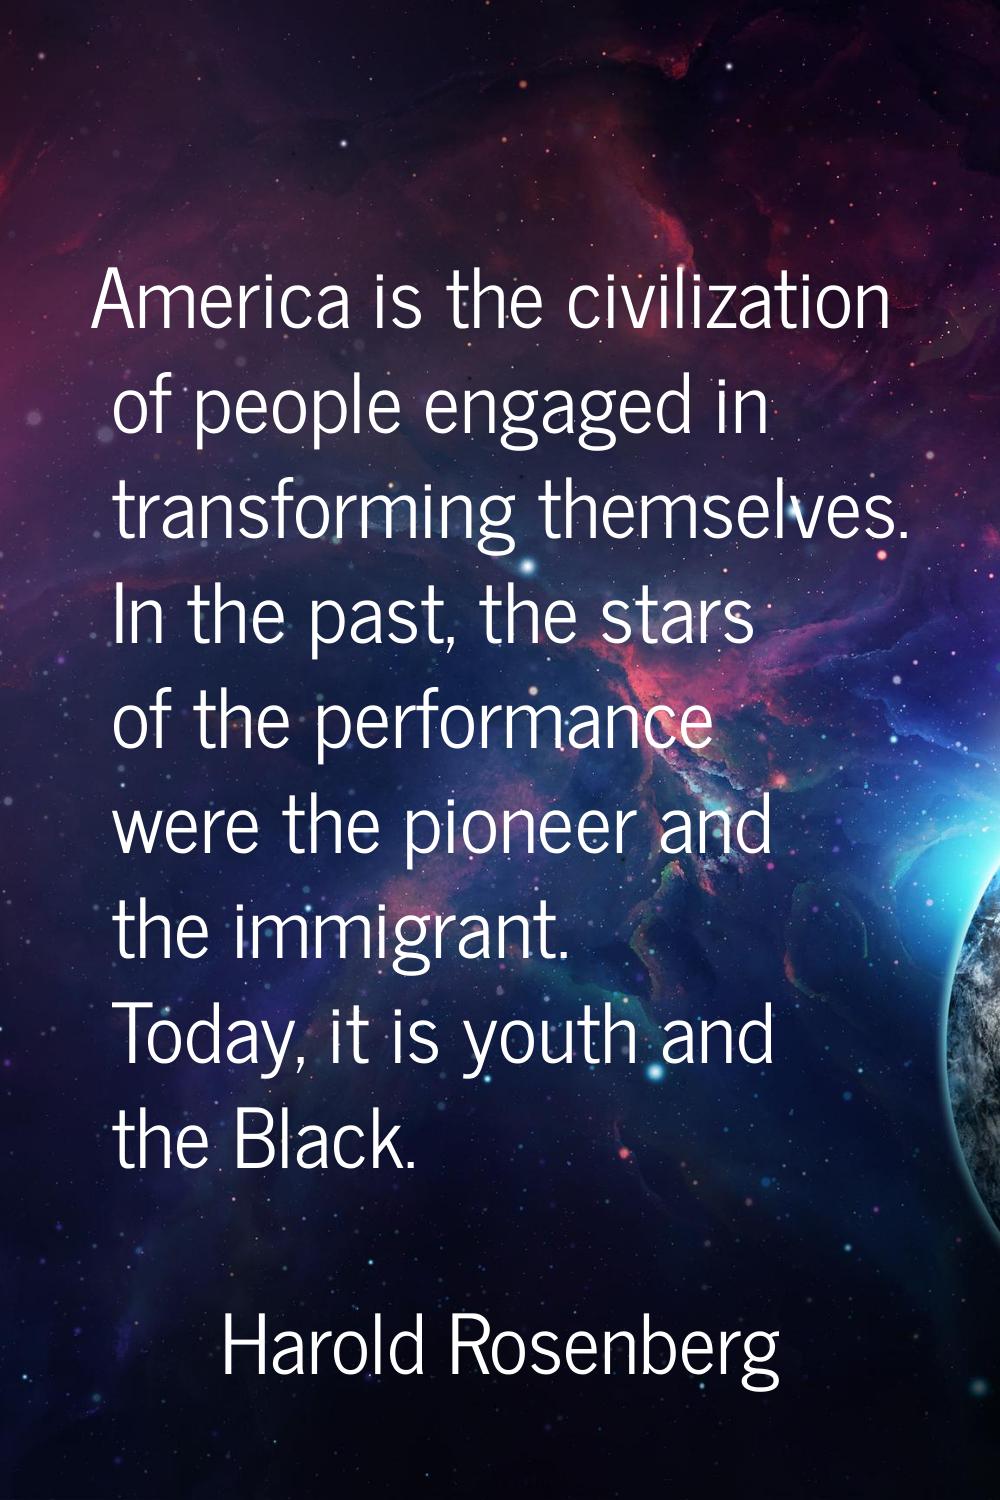 America is the civilization of people engaged in transforming themselves. In the past, the stars of